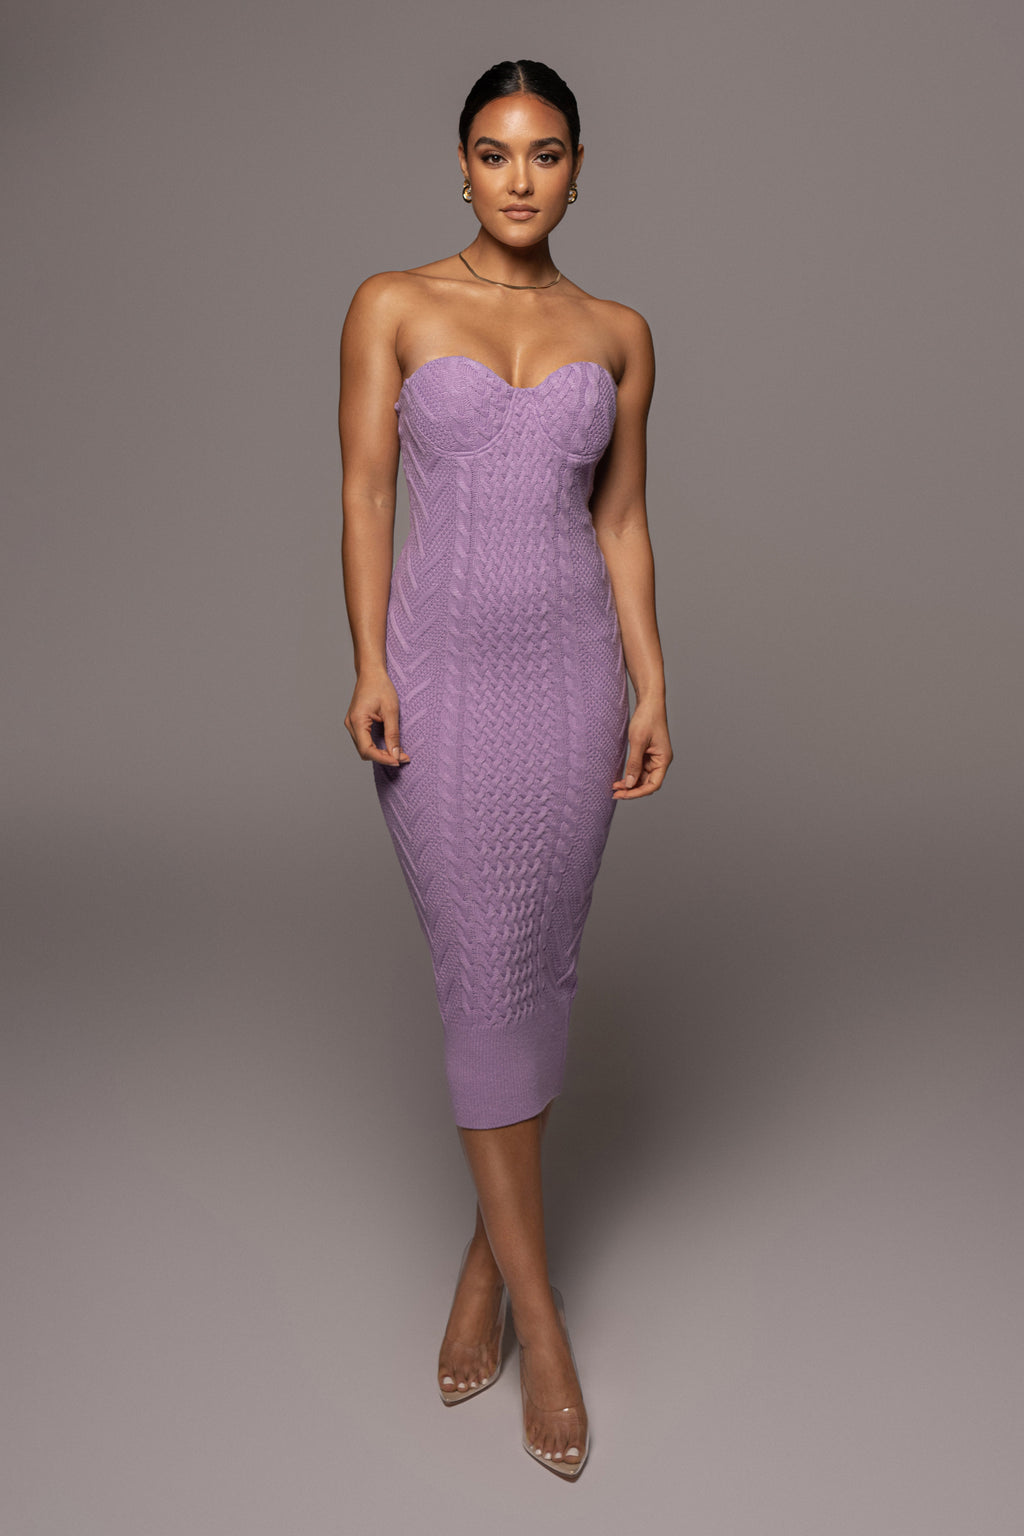 Lilac Shades Of You Bustier Dress